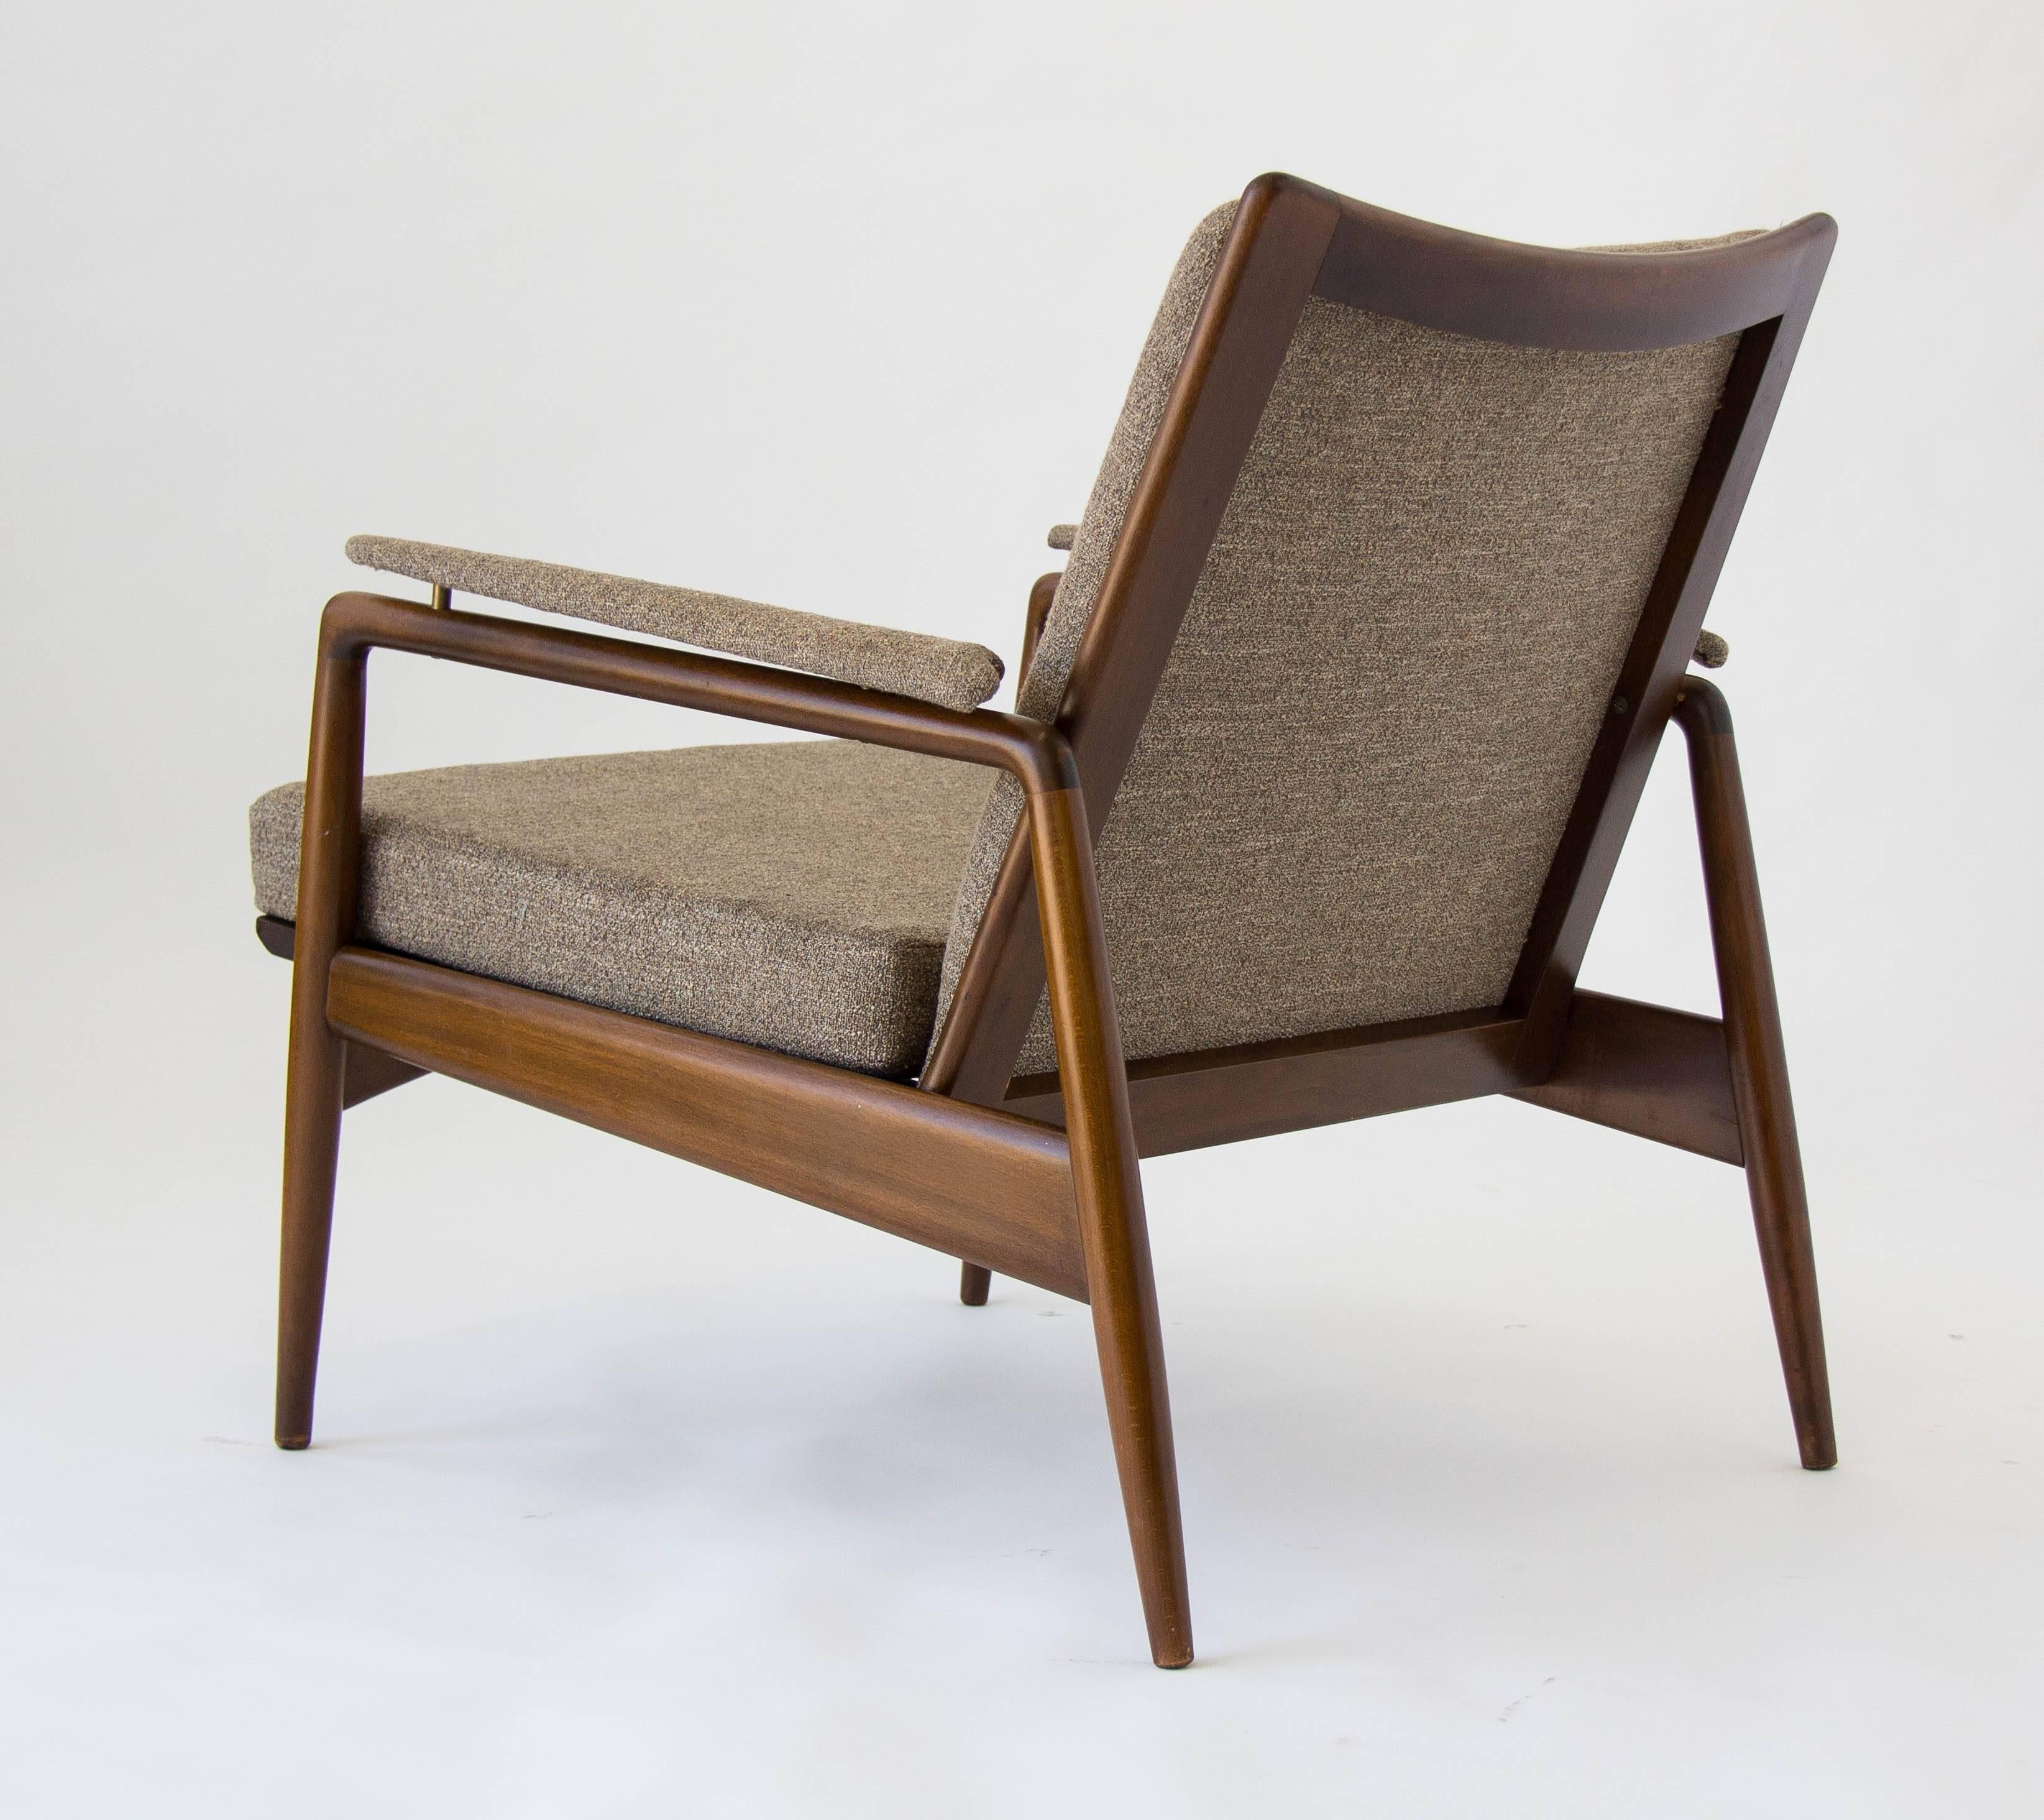 20th Century Danish Modern Lounge Chair Imported by Selig